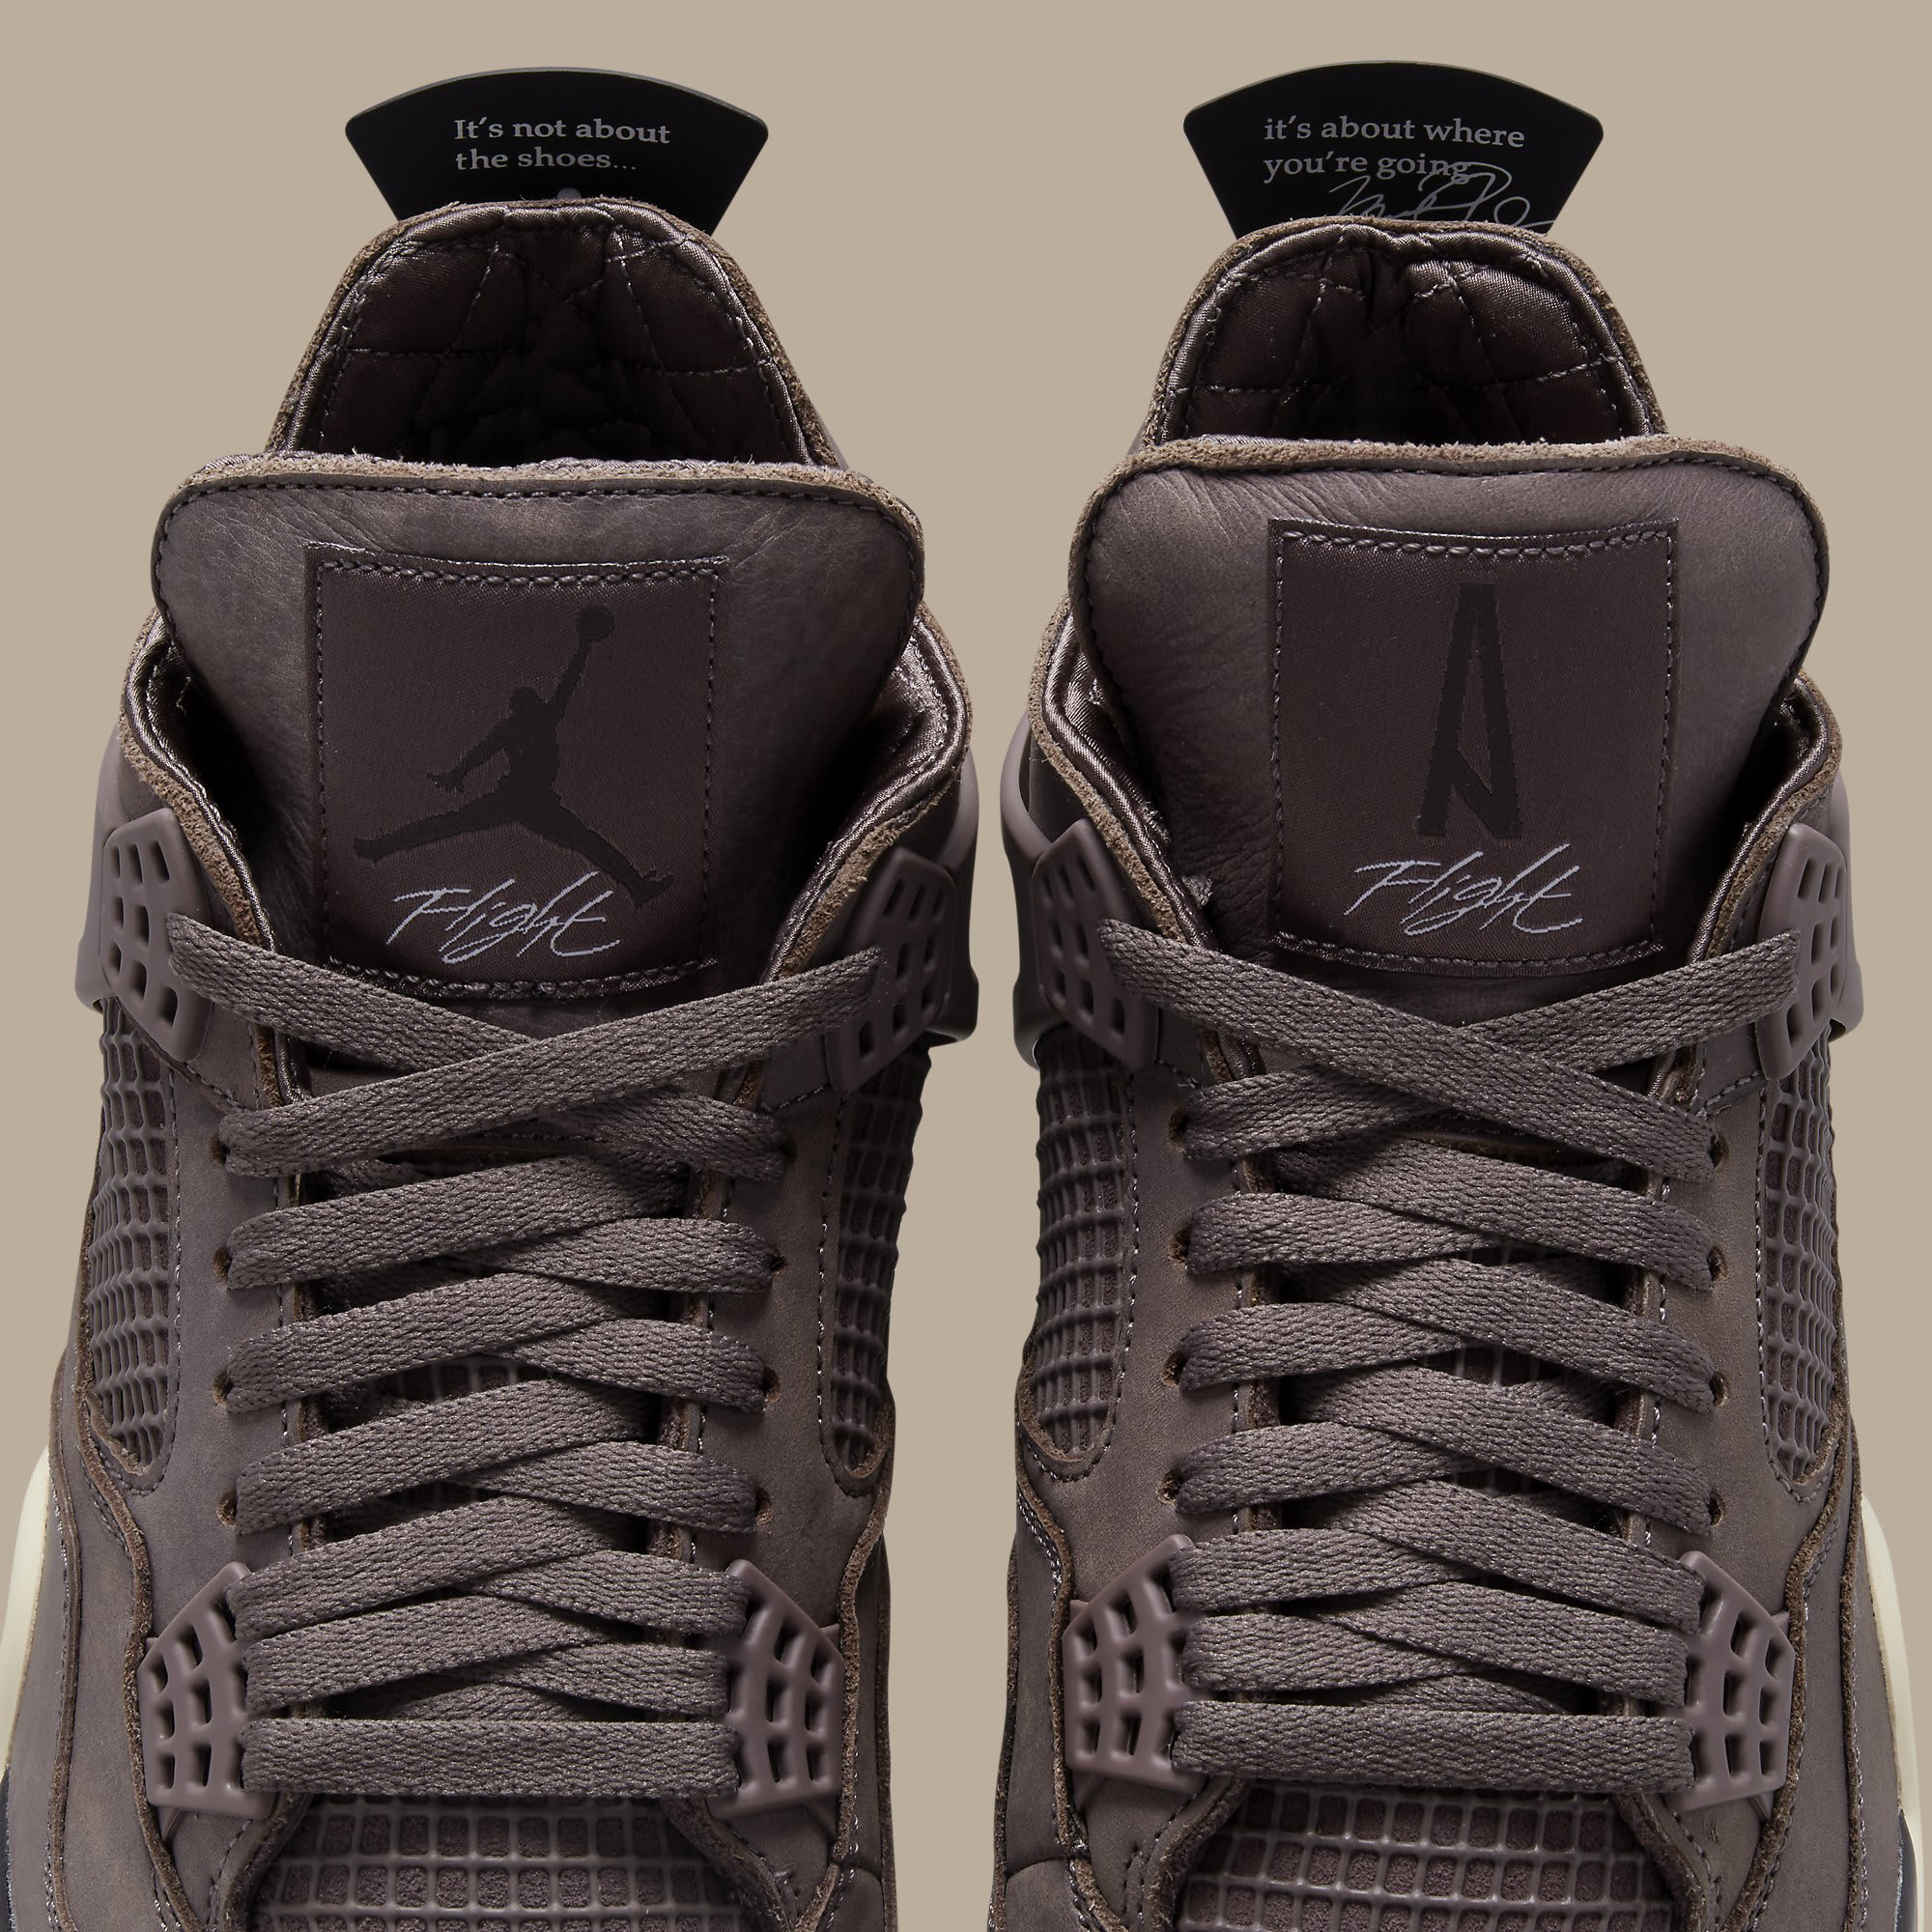 A Ma Maniére x Air Jordan 4 Releases This Month | Complex